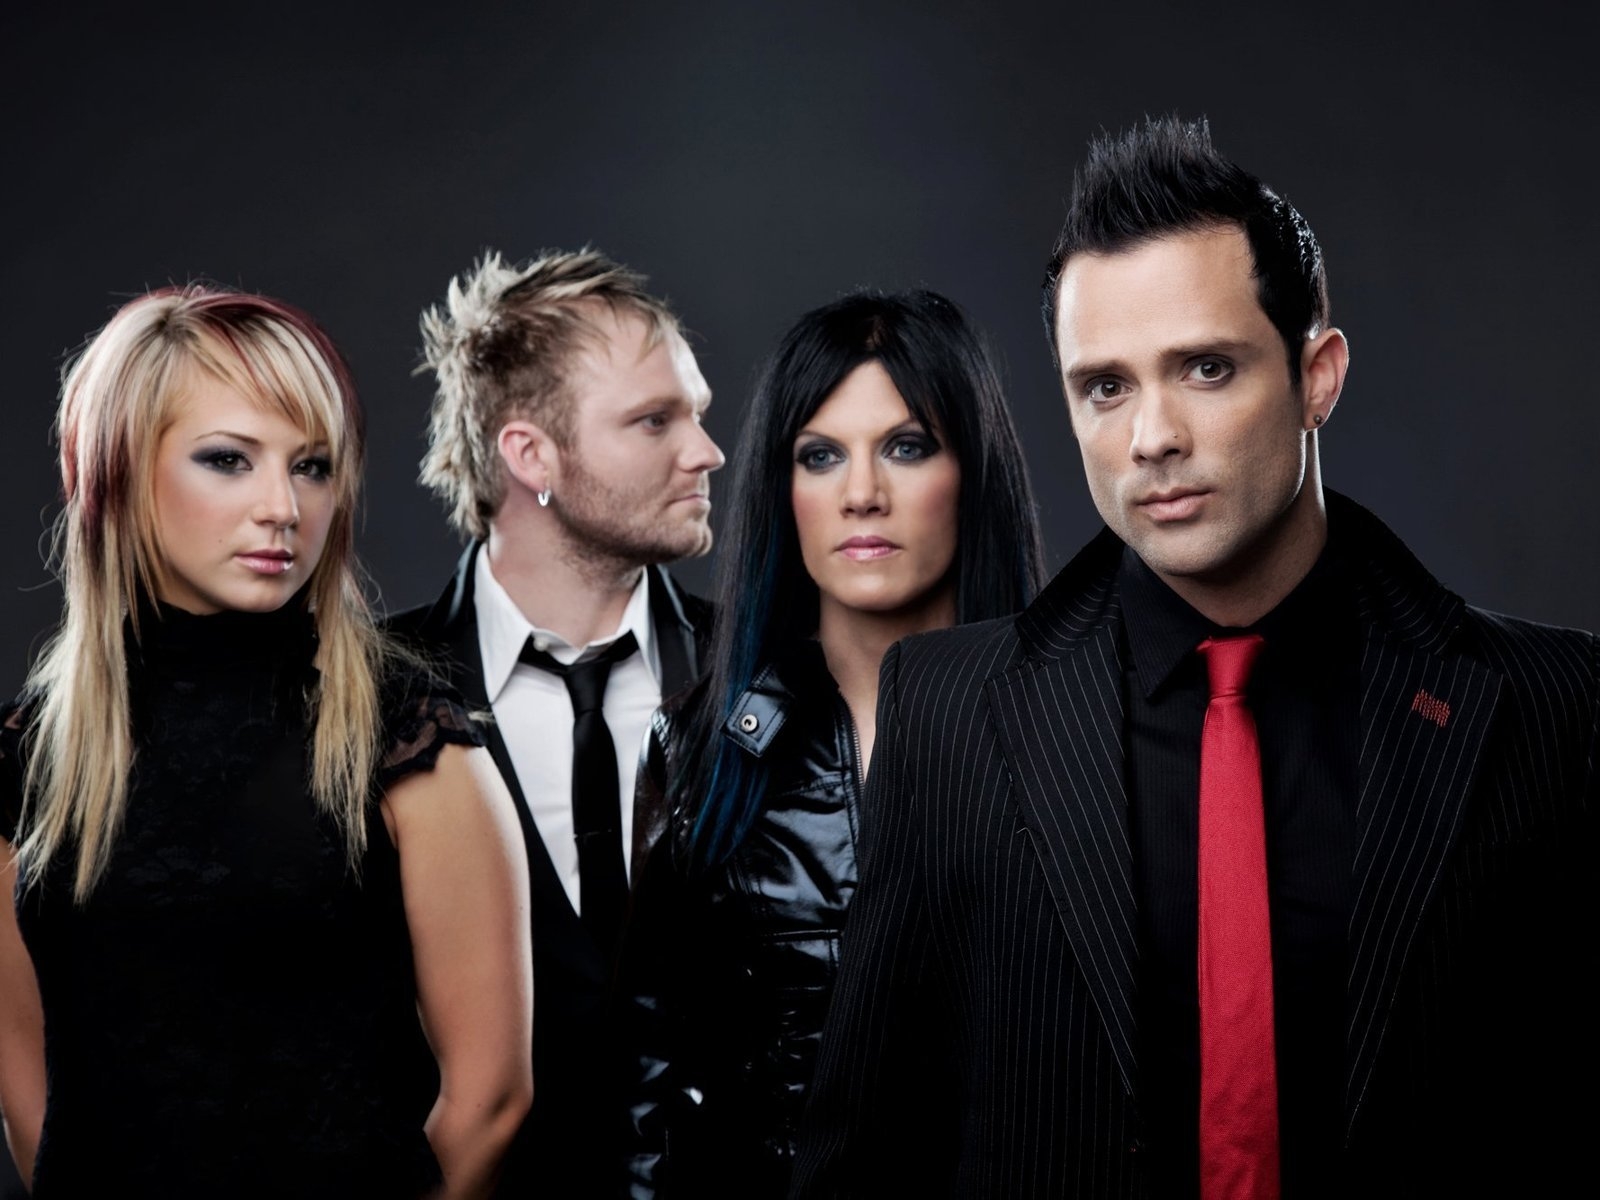 Skillet Band Members for 1600 x 1200 resolution